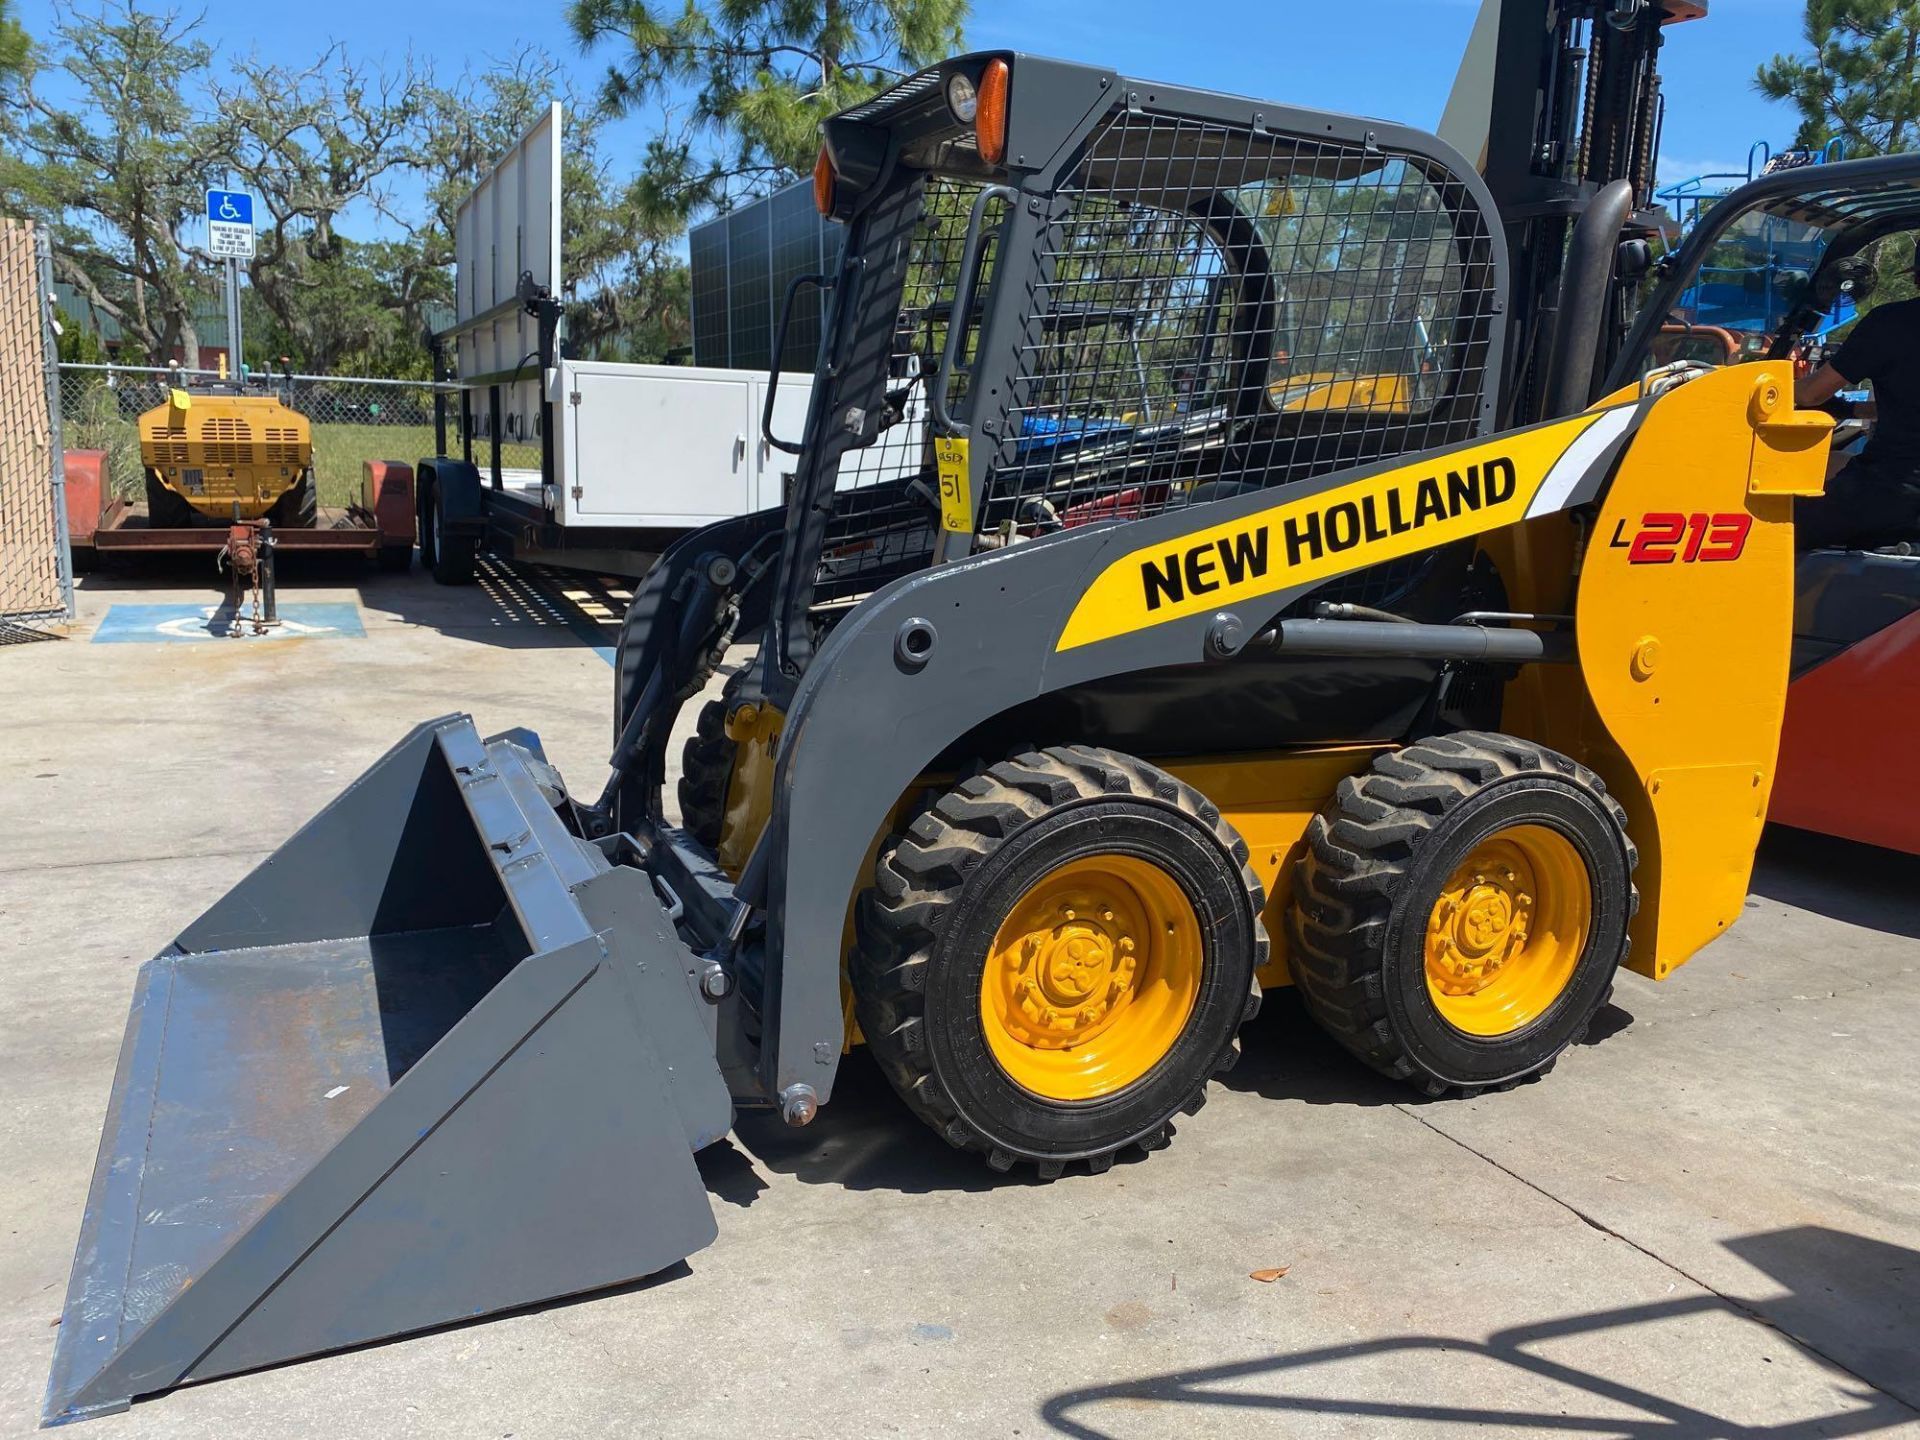 2011 NEW HOLLAND SKID STEER, APPROX. 3,800 HOURS SHOWING, BUCKET ATTACHMENT, RUNS AND OPERATES